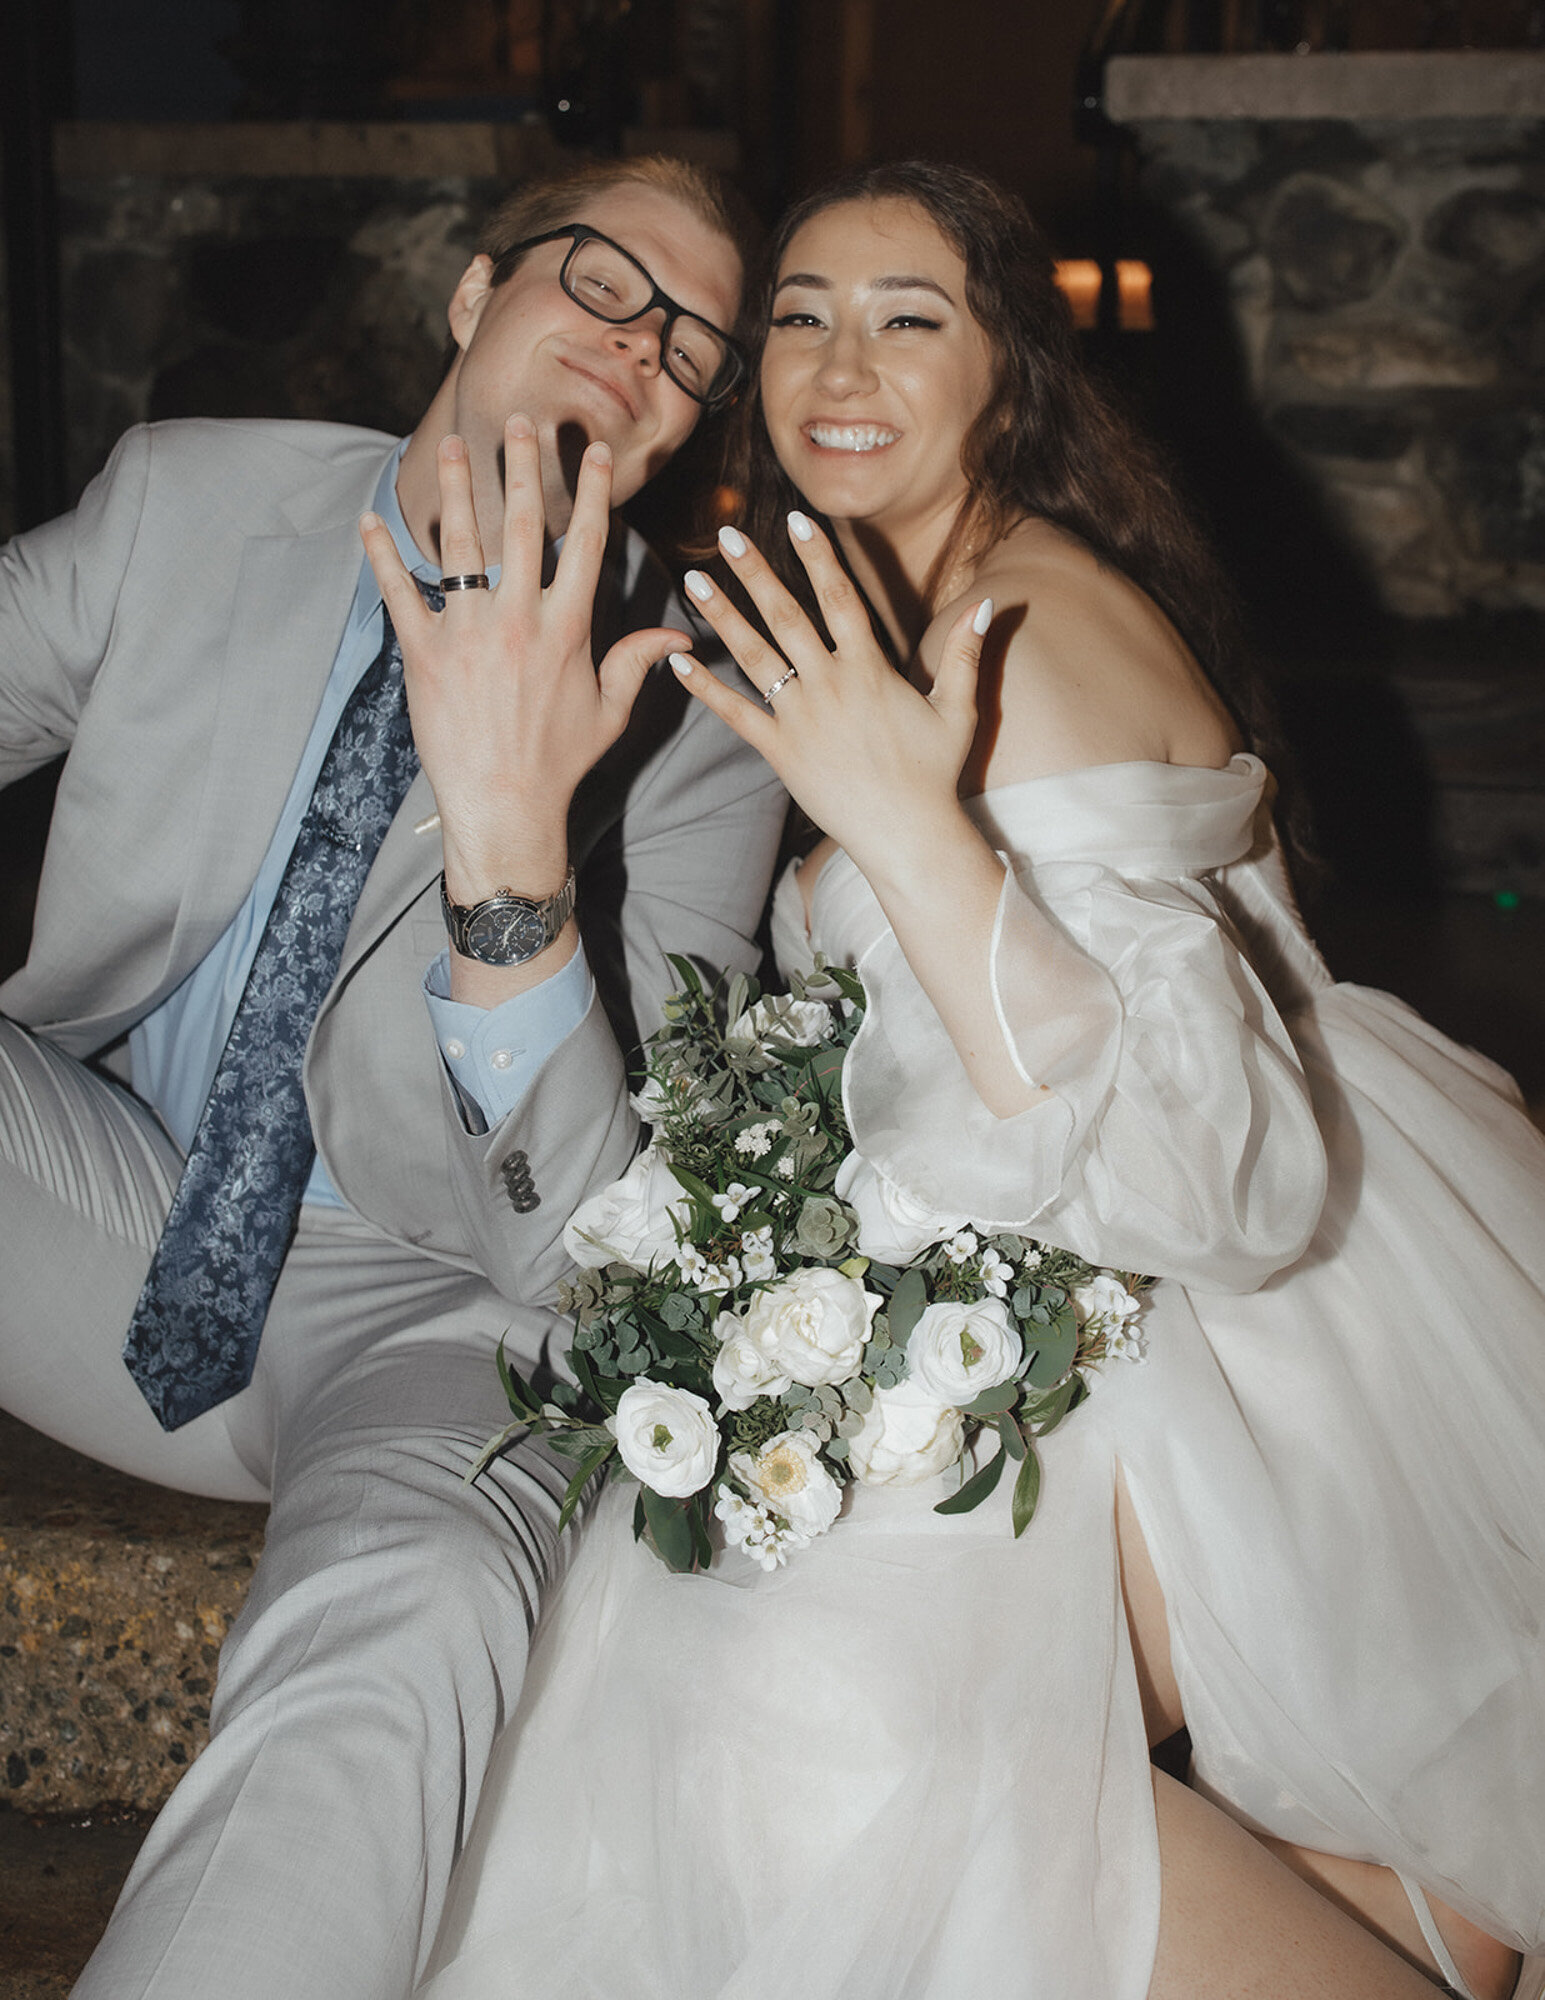 Bride and groom happily showing their hands wearing their wedding ring